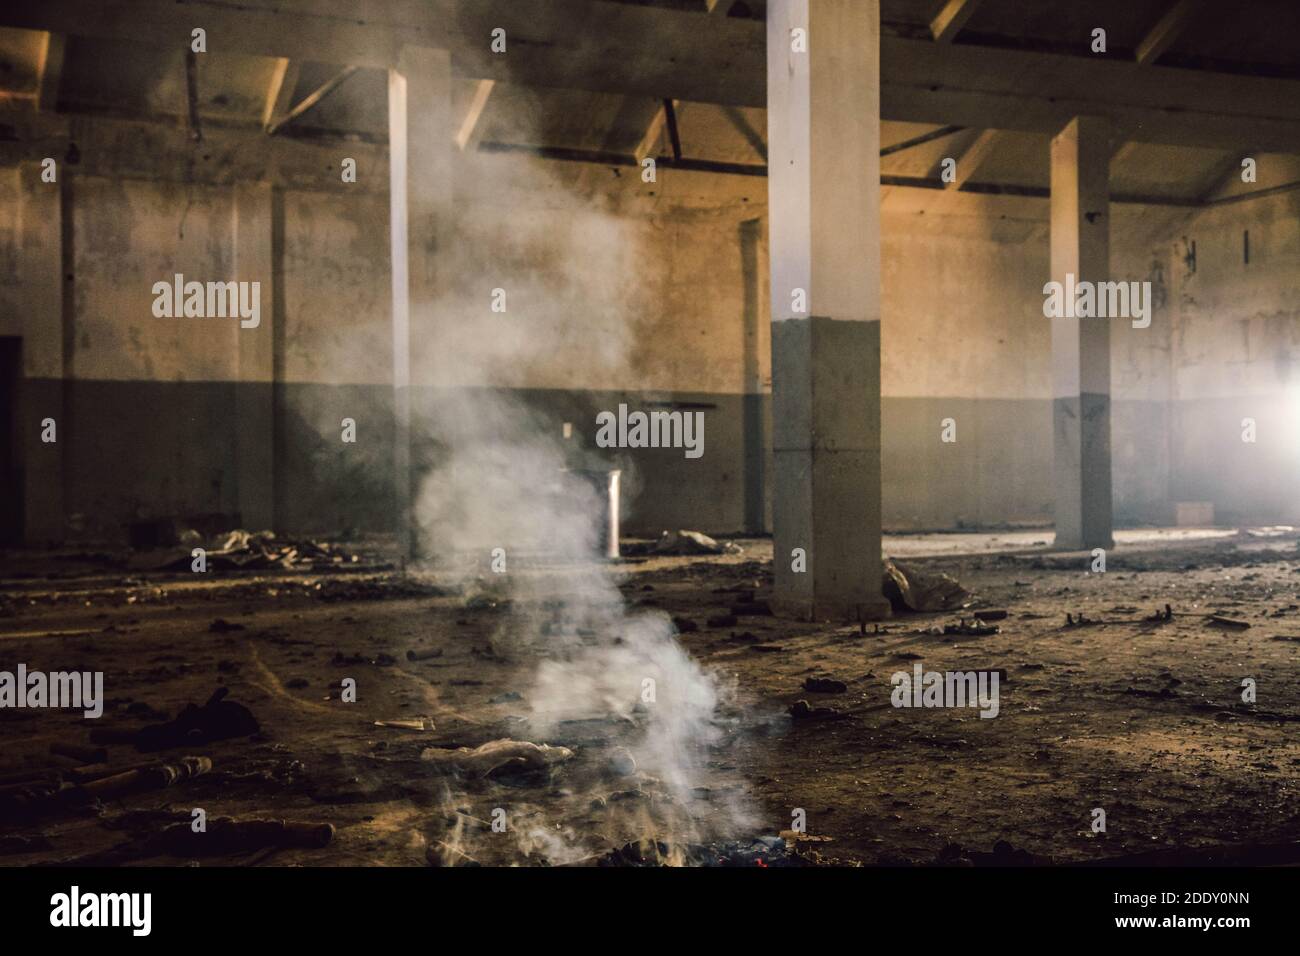 Abandoned old factory Hall scene with smoke and messy interior Stock Photo